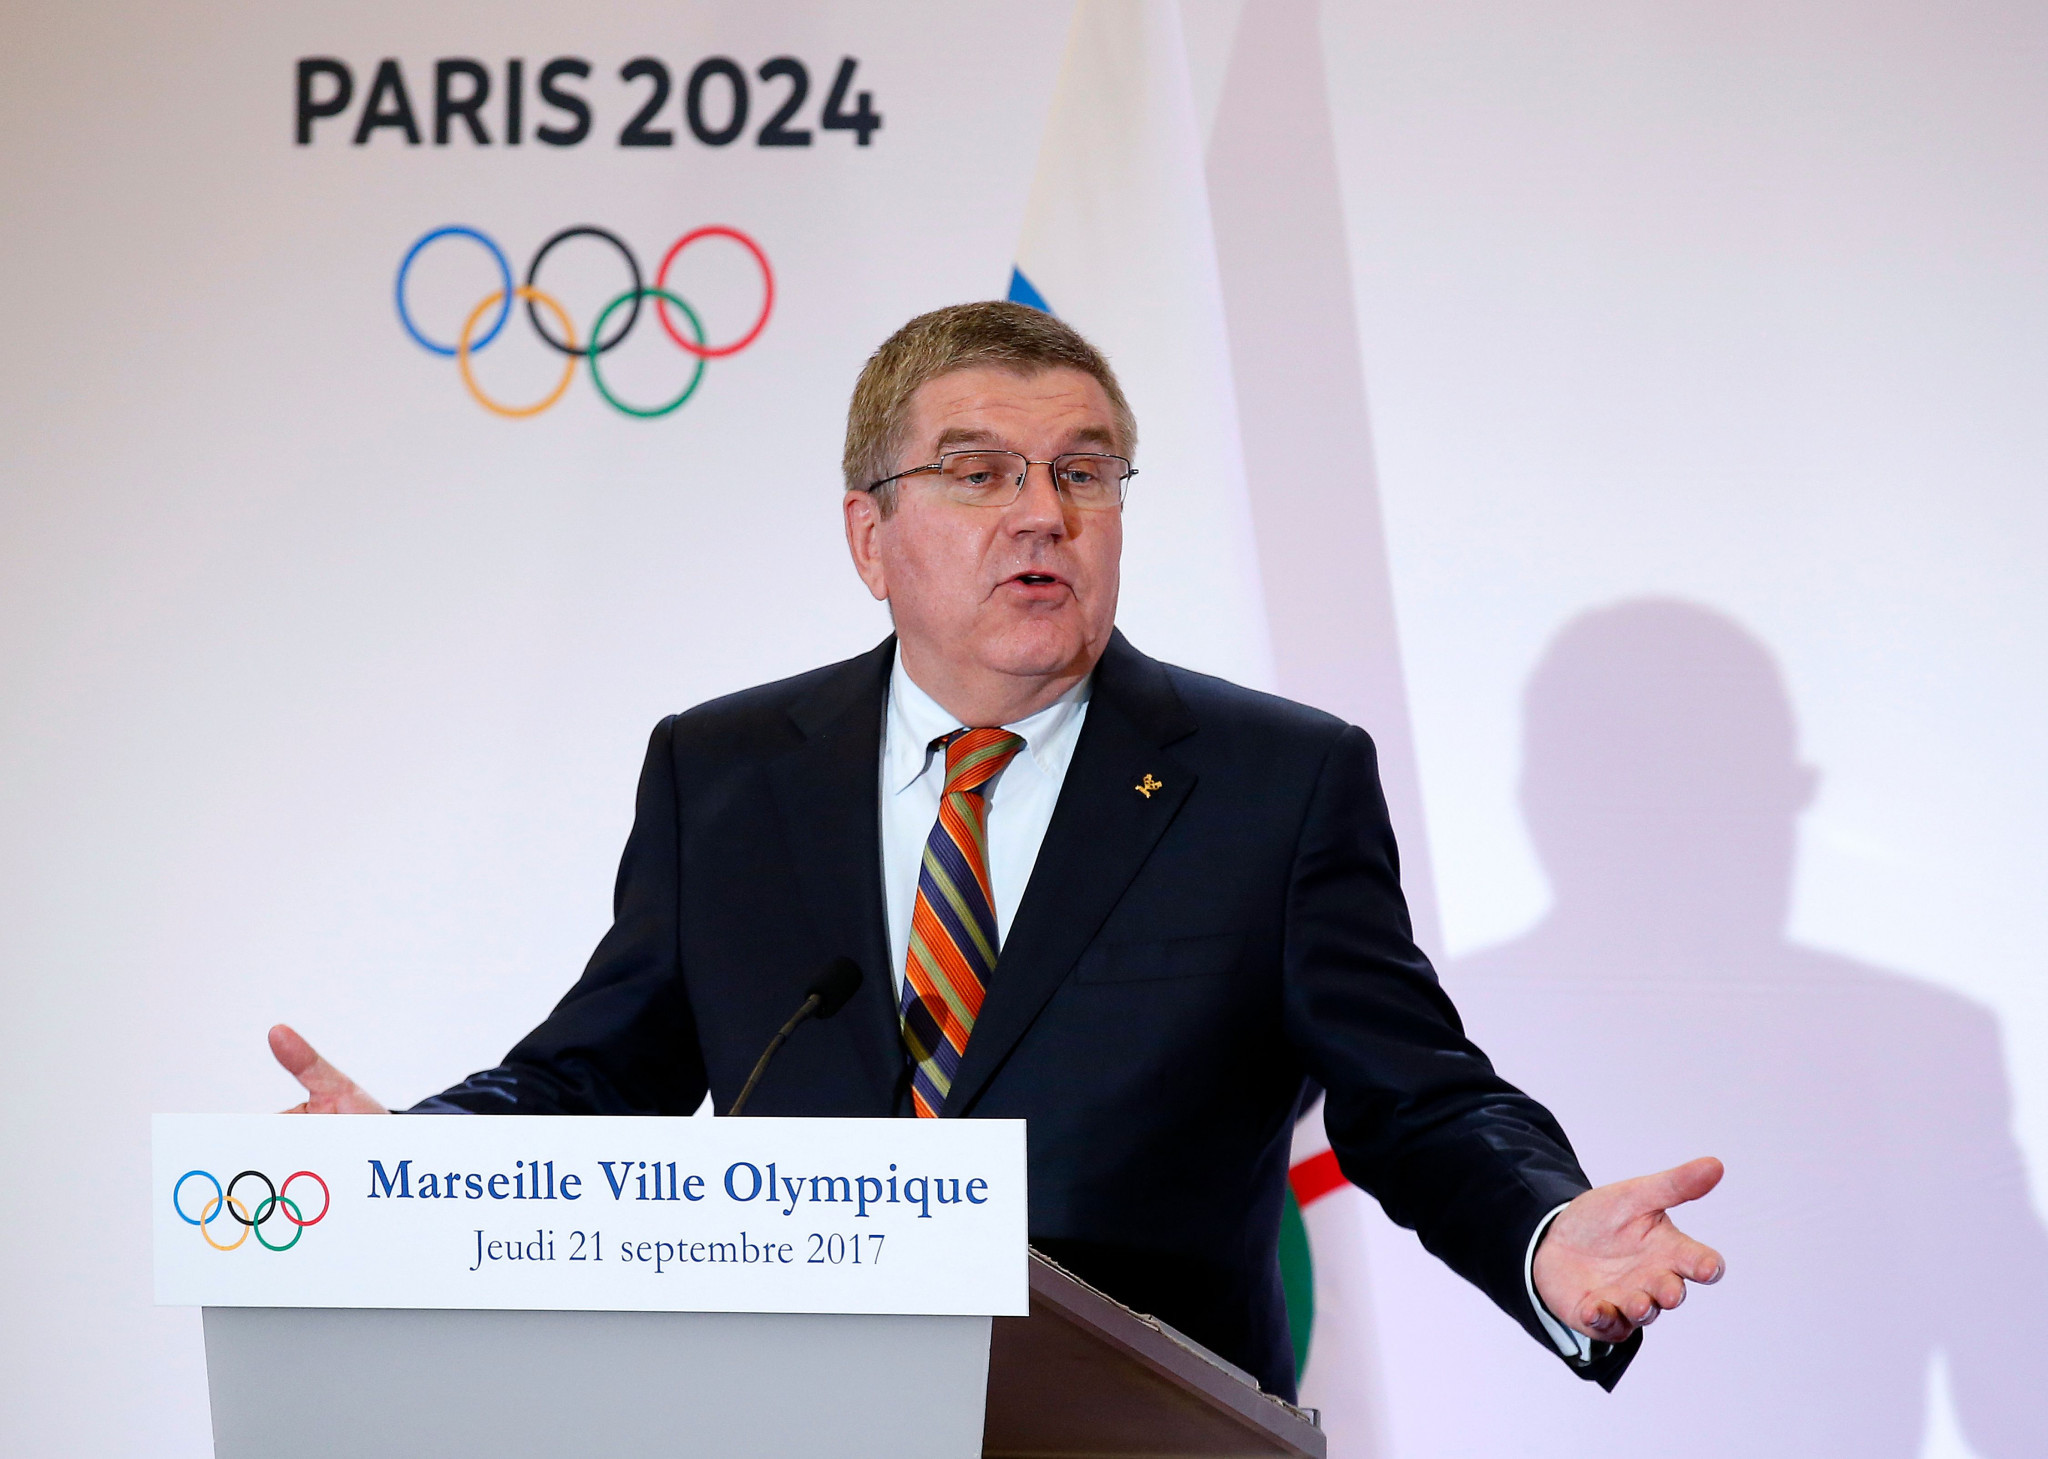 IOC President Thomas Bach has warned weightlifting to address their doping problem or lose their place on the Olympic programme ©Getty Images